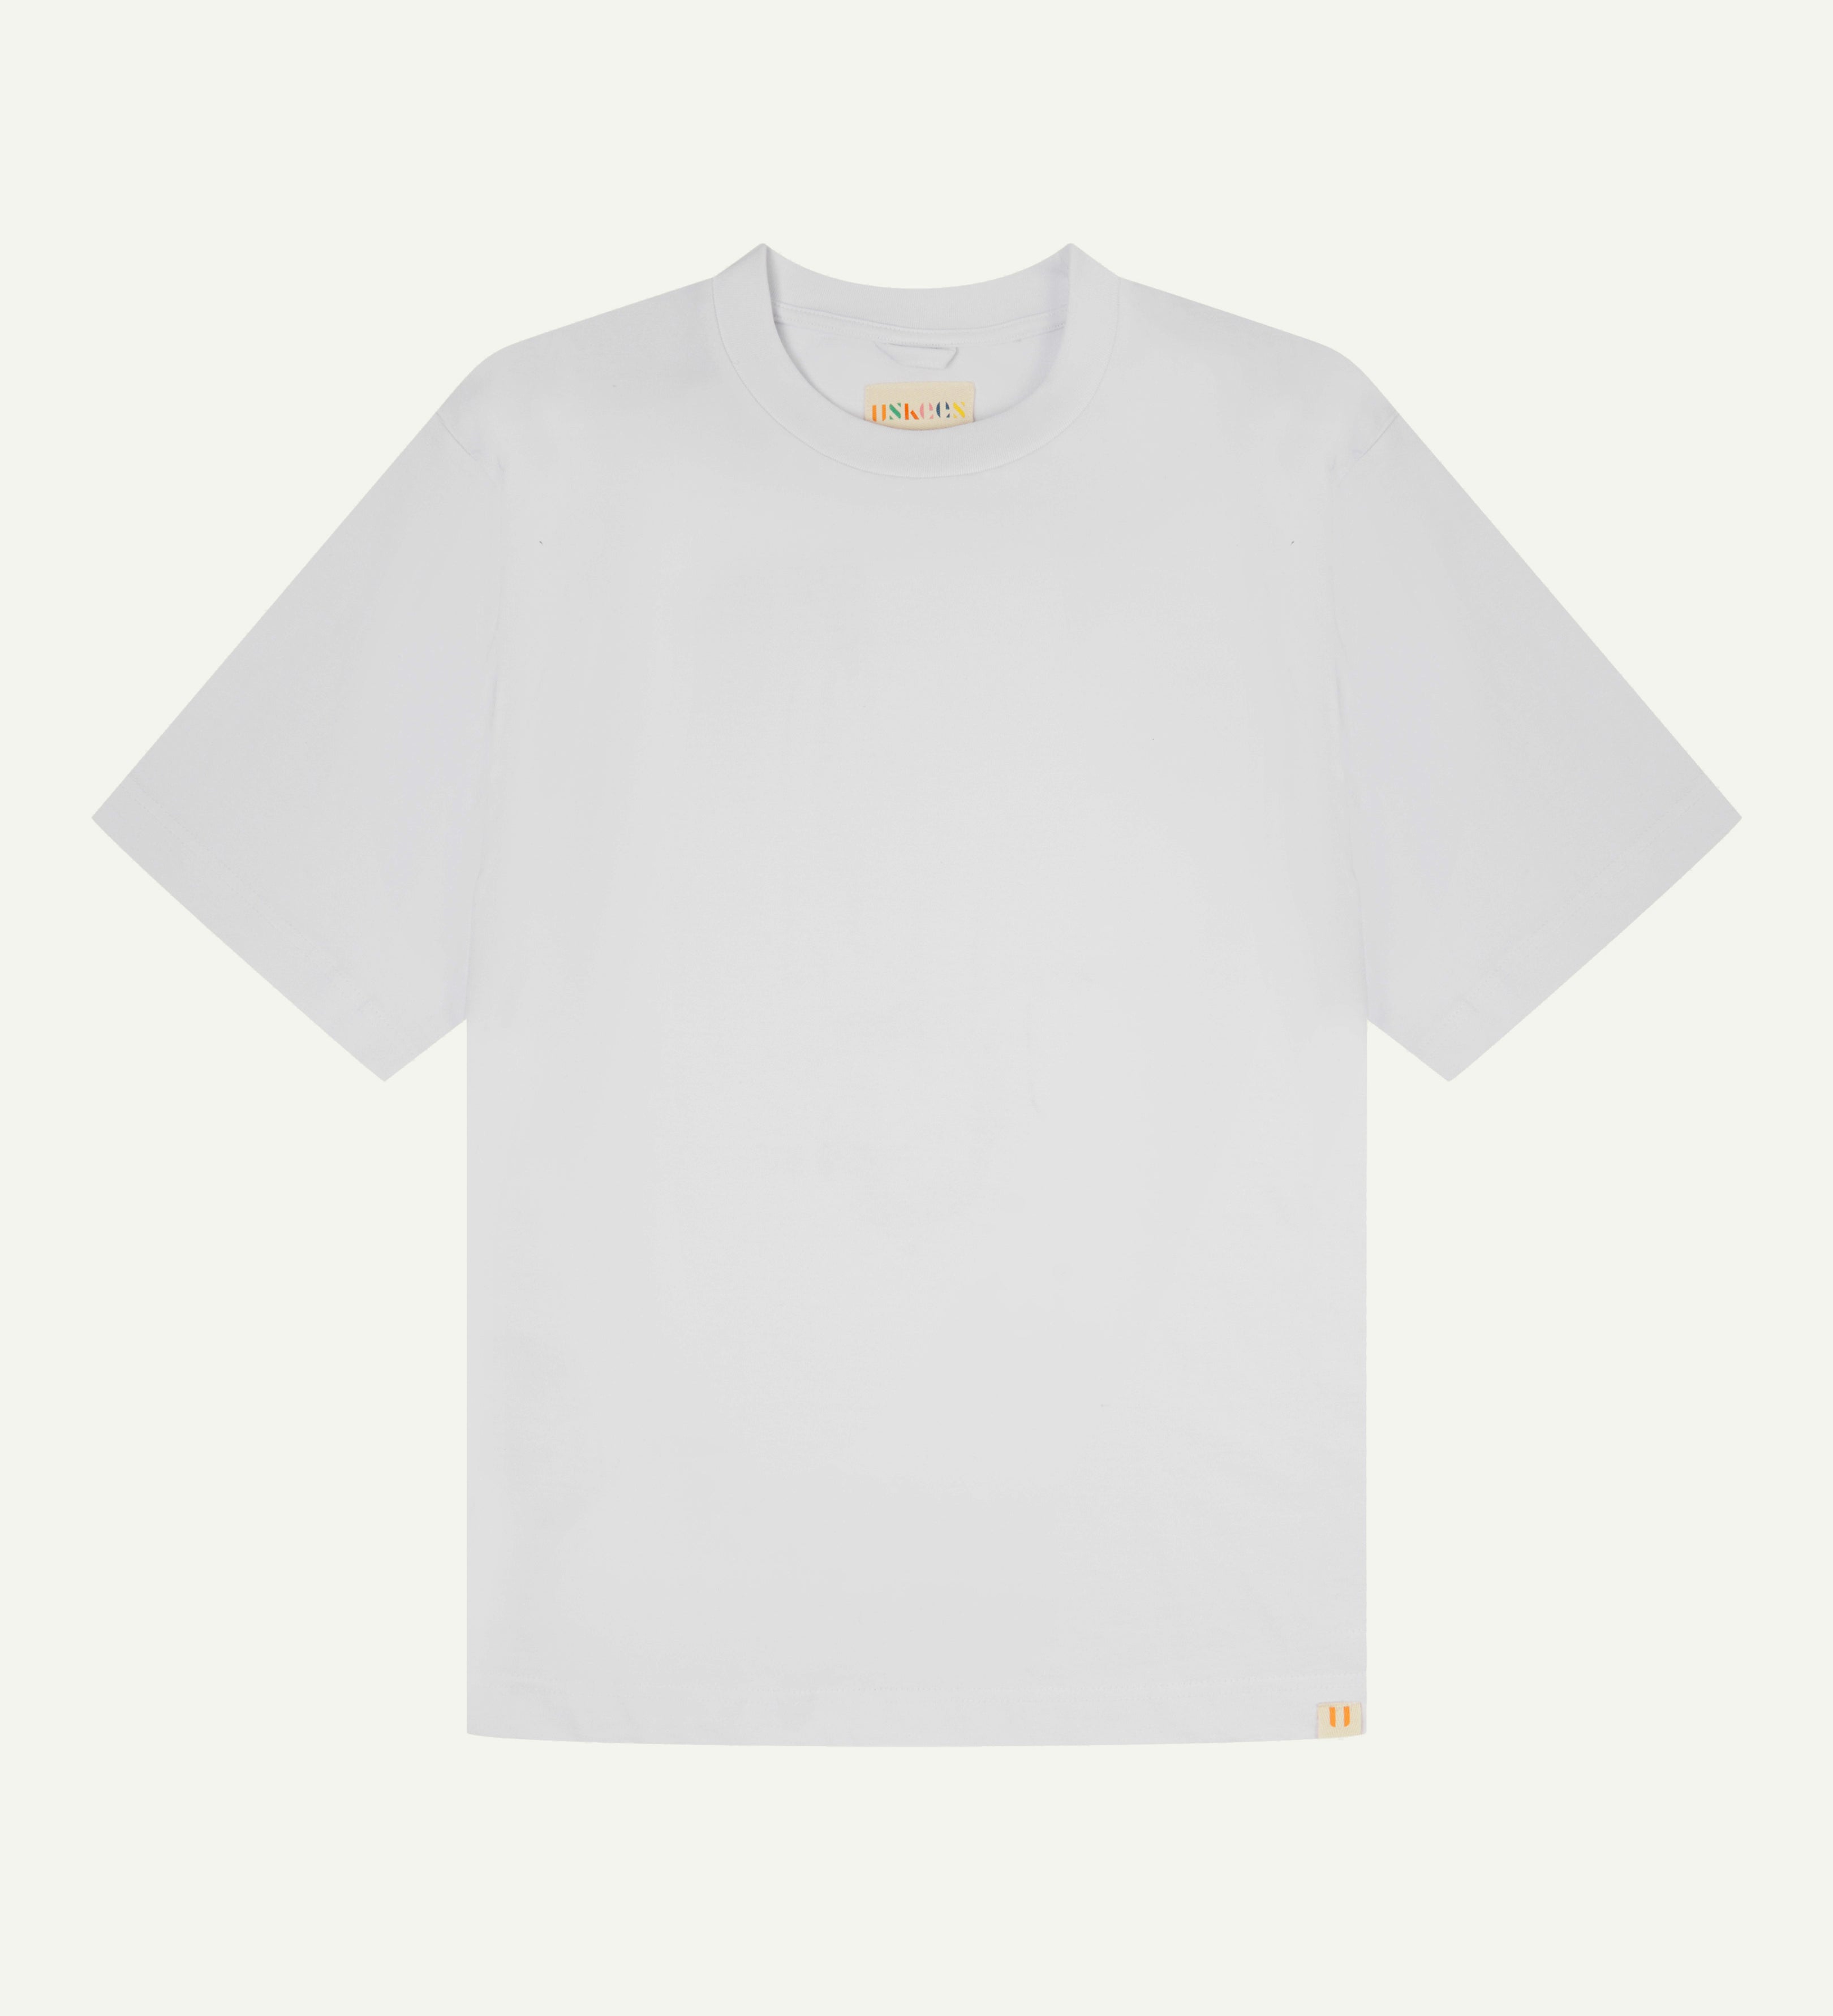 Front flat view of men's white oversized organic cotton T-shirt by Uskees